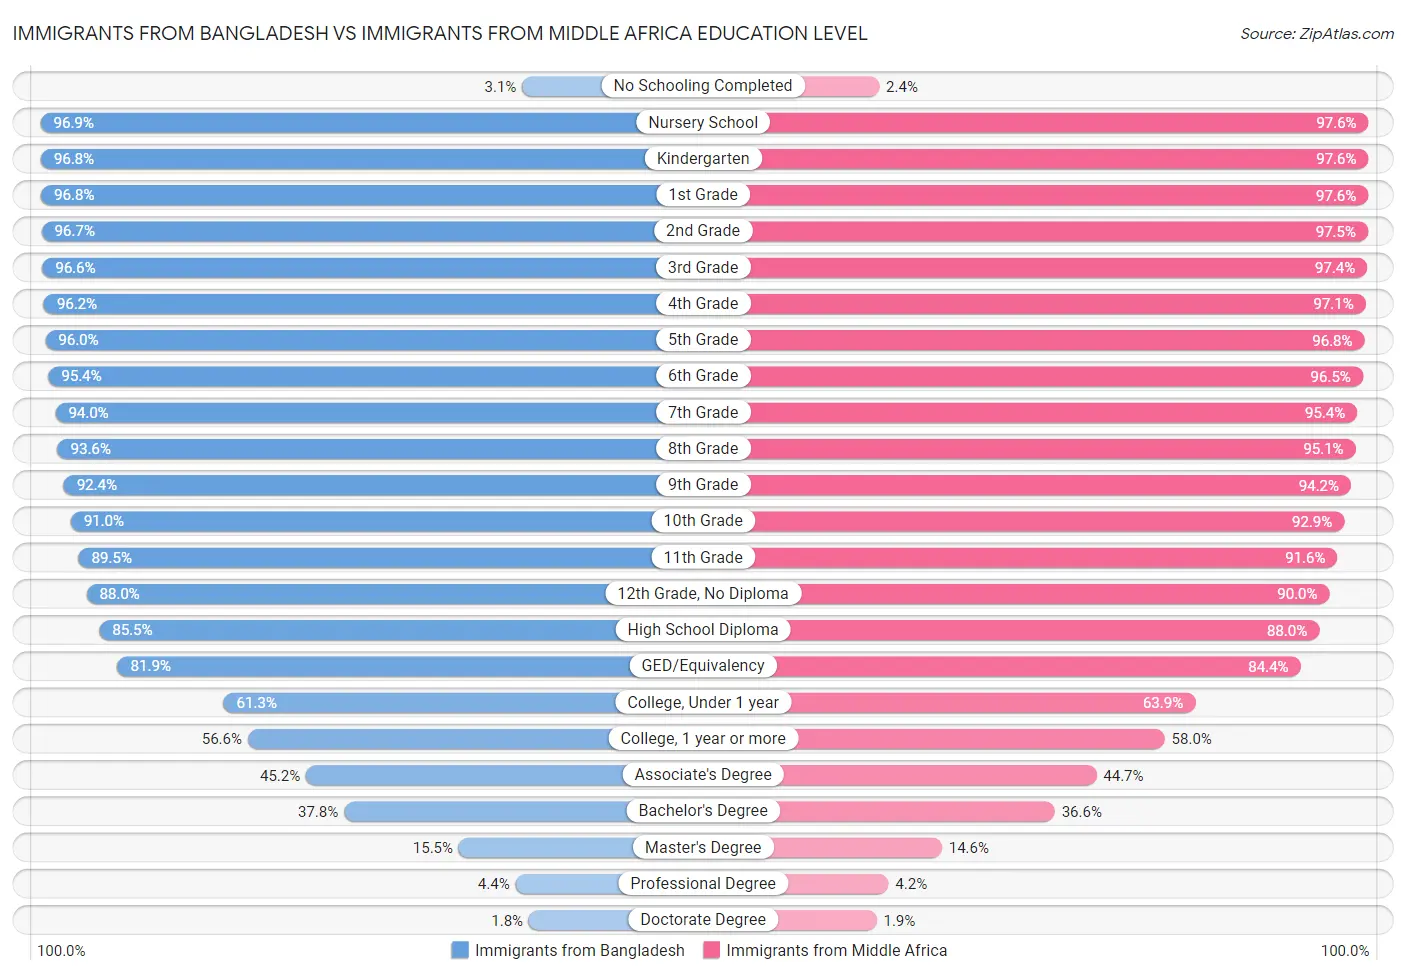 Immigrants from Bangladesh vs Immigrants from Middle Africa Education Level